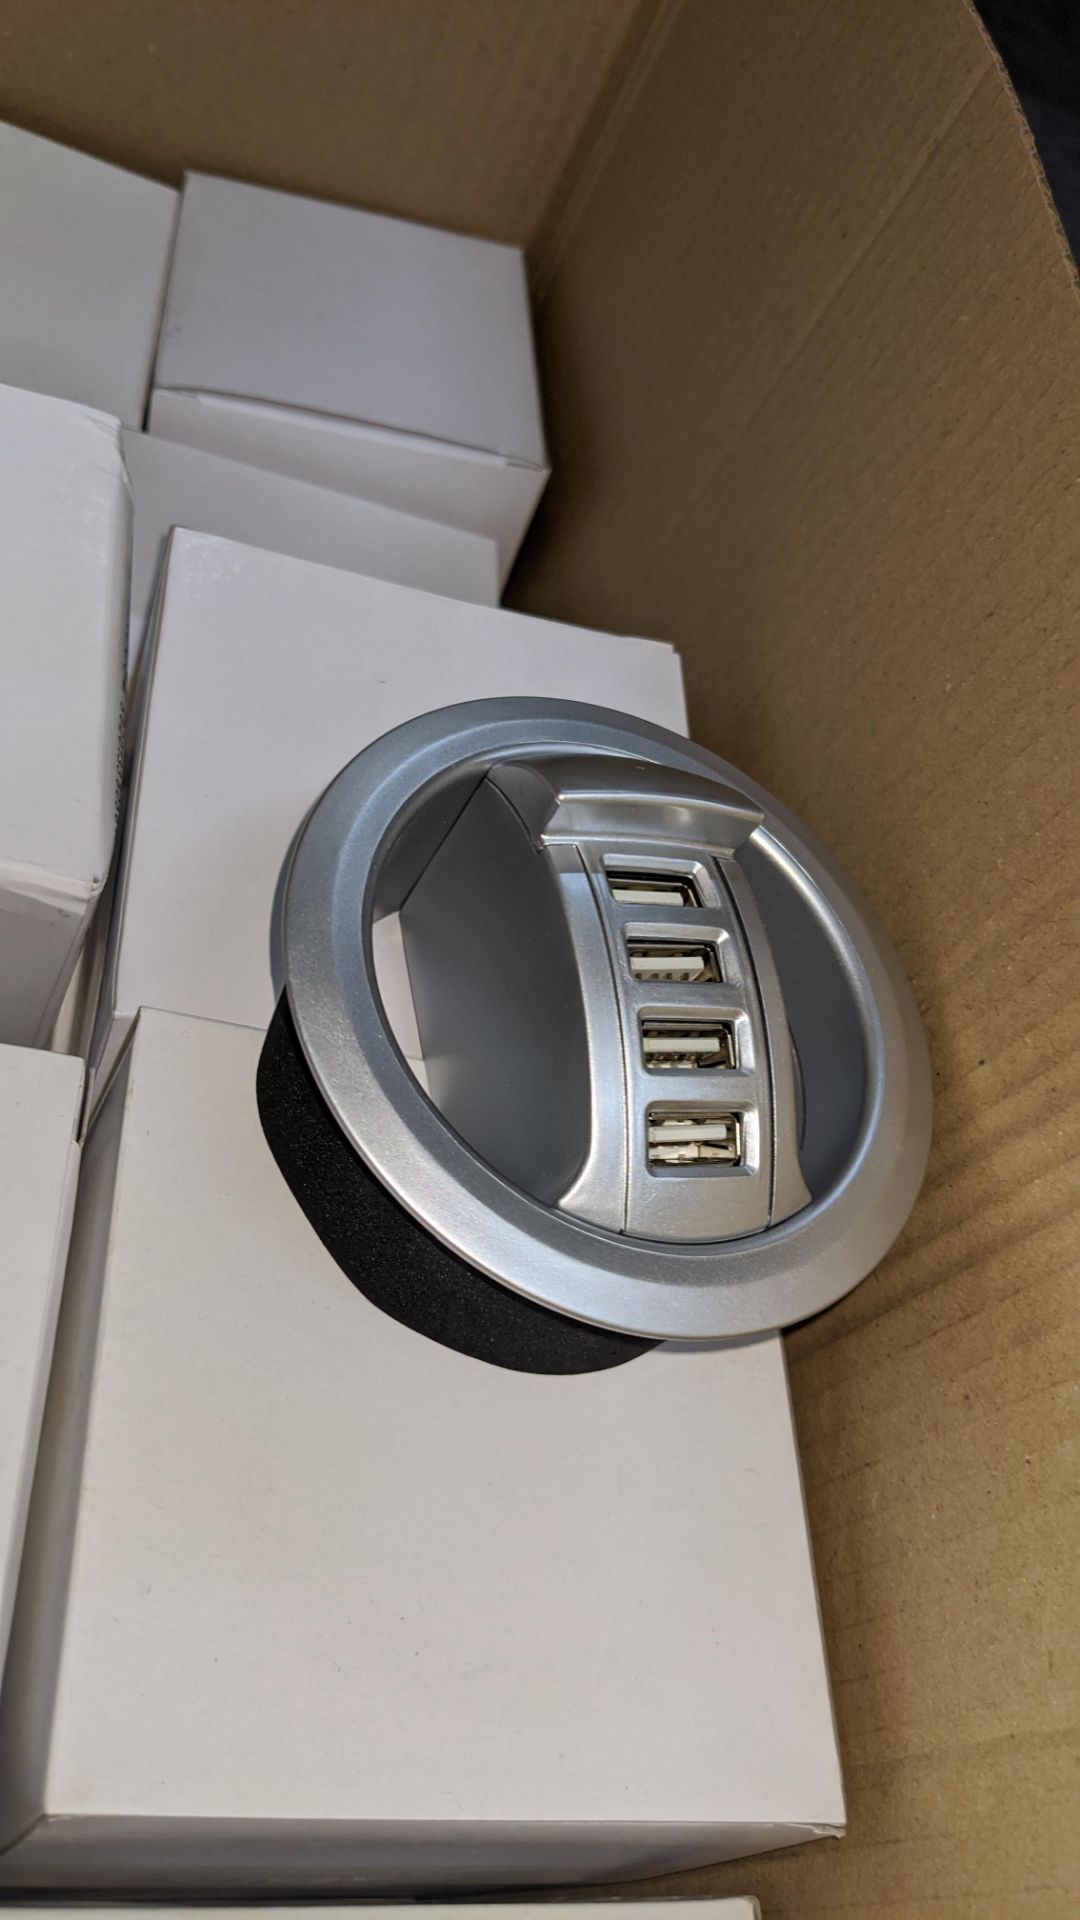 100 off (2 cartons) 4 port USB hubs to fit standard 80mm desk cable tidy aperture. Product dimensio - Image 3 of 3